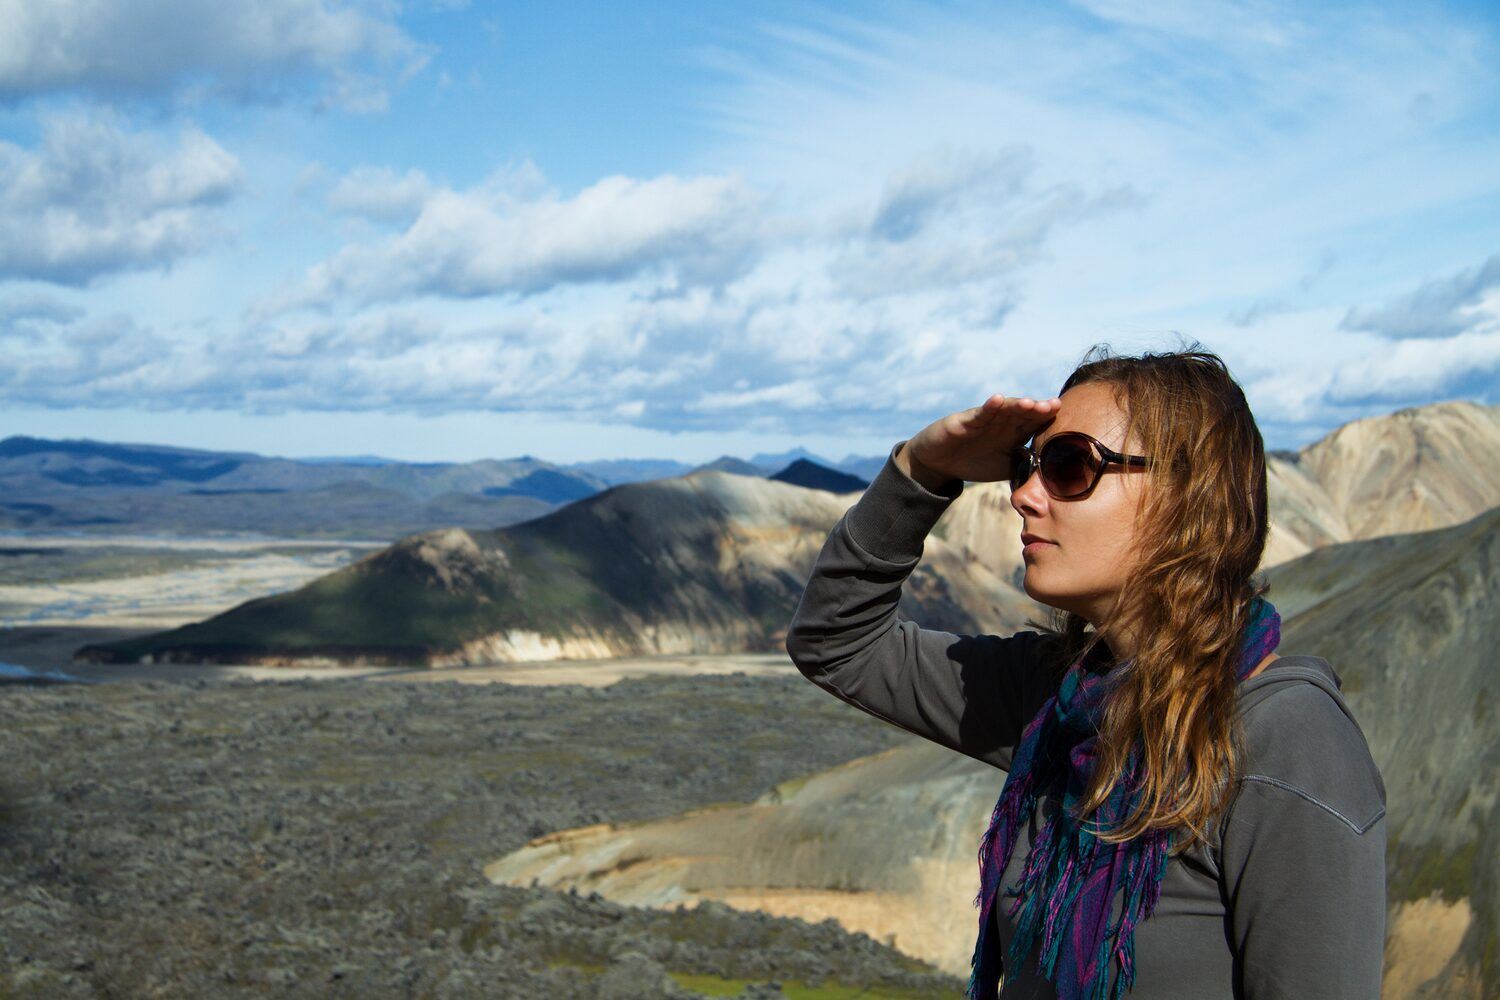 Female tourist with sunglasses, looking out at scenic view in Landmannalaugar, Iceland.